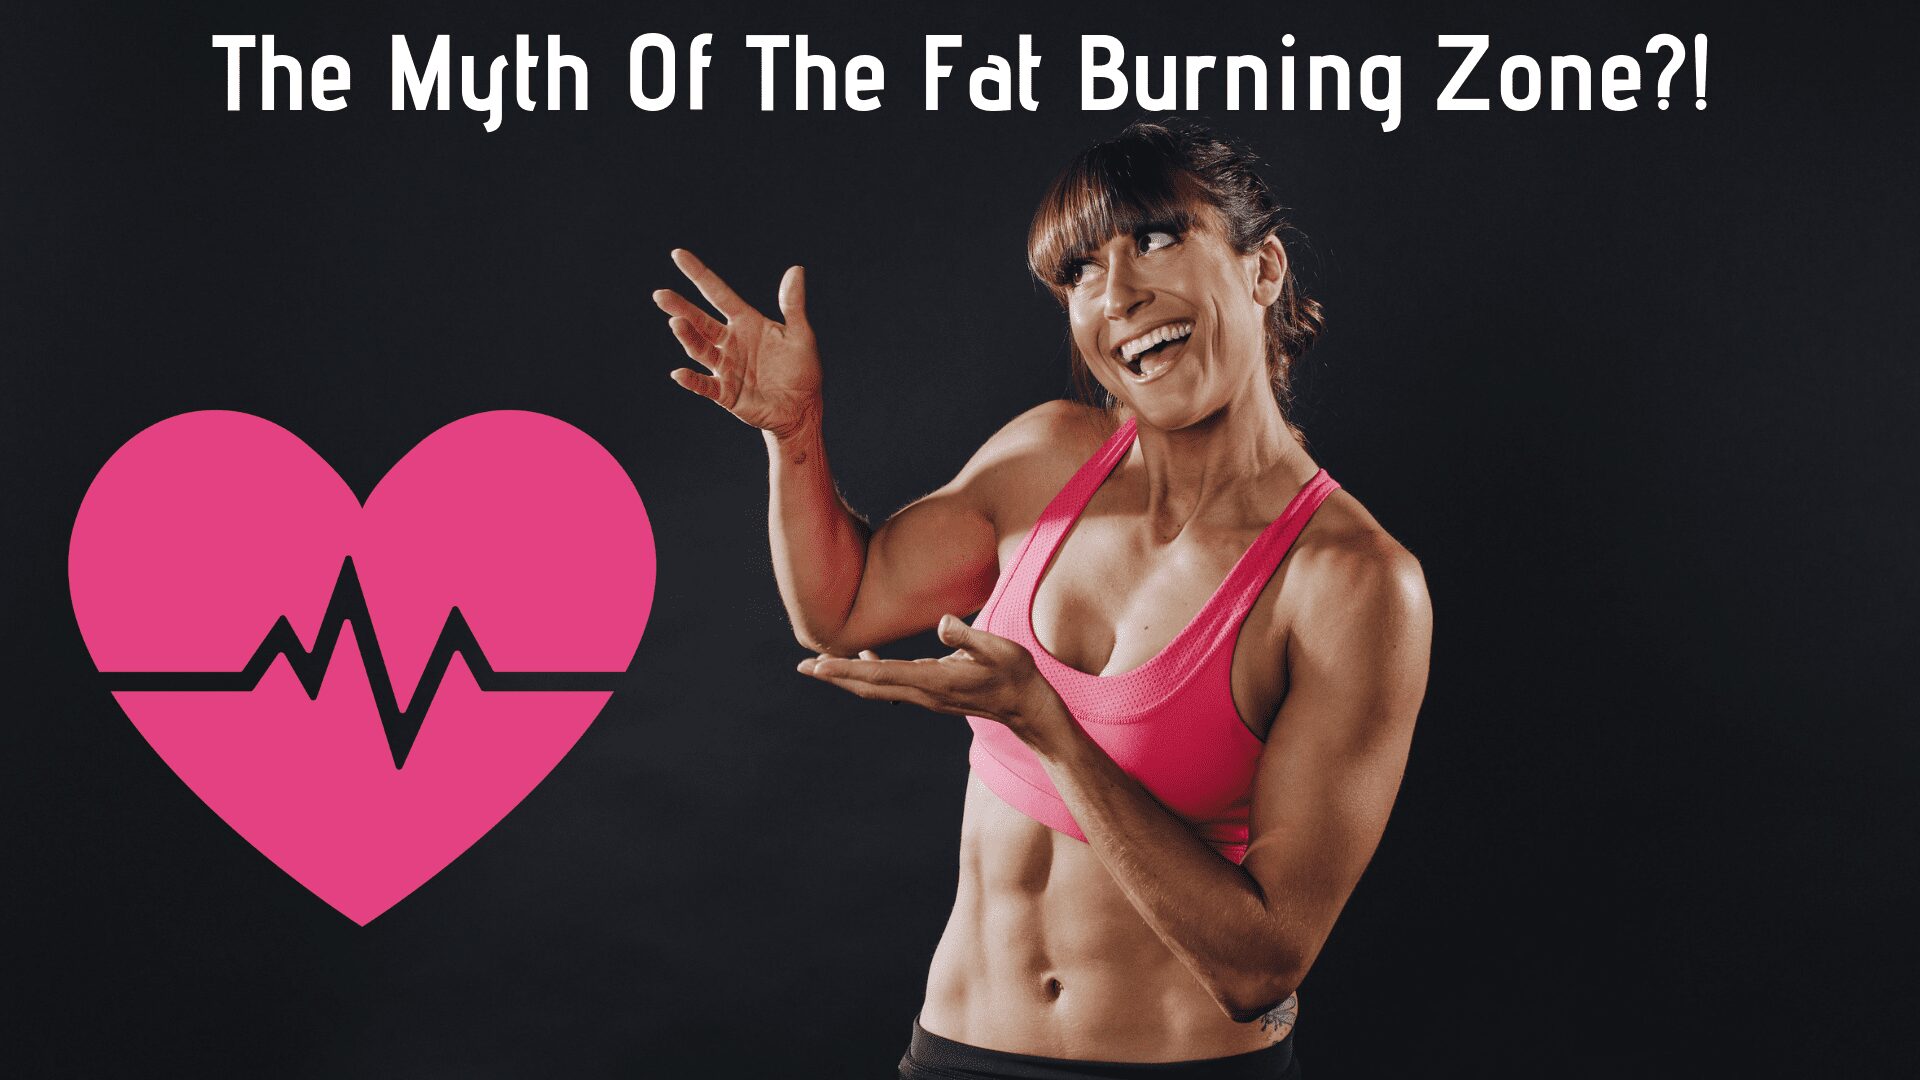 The Myth Of The Fat Burning Zone